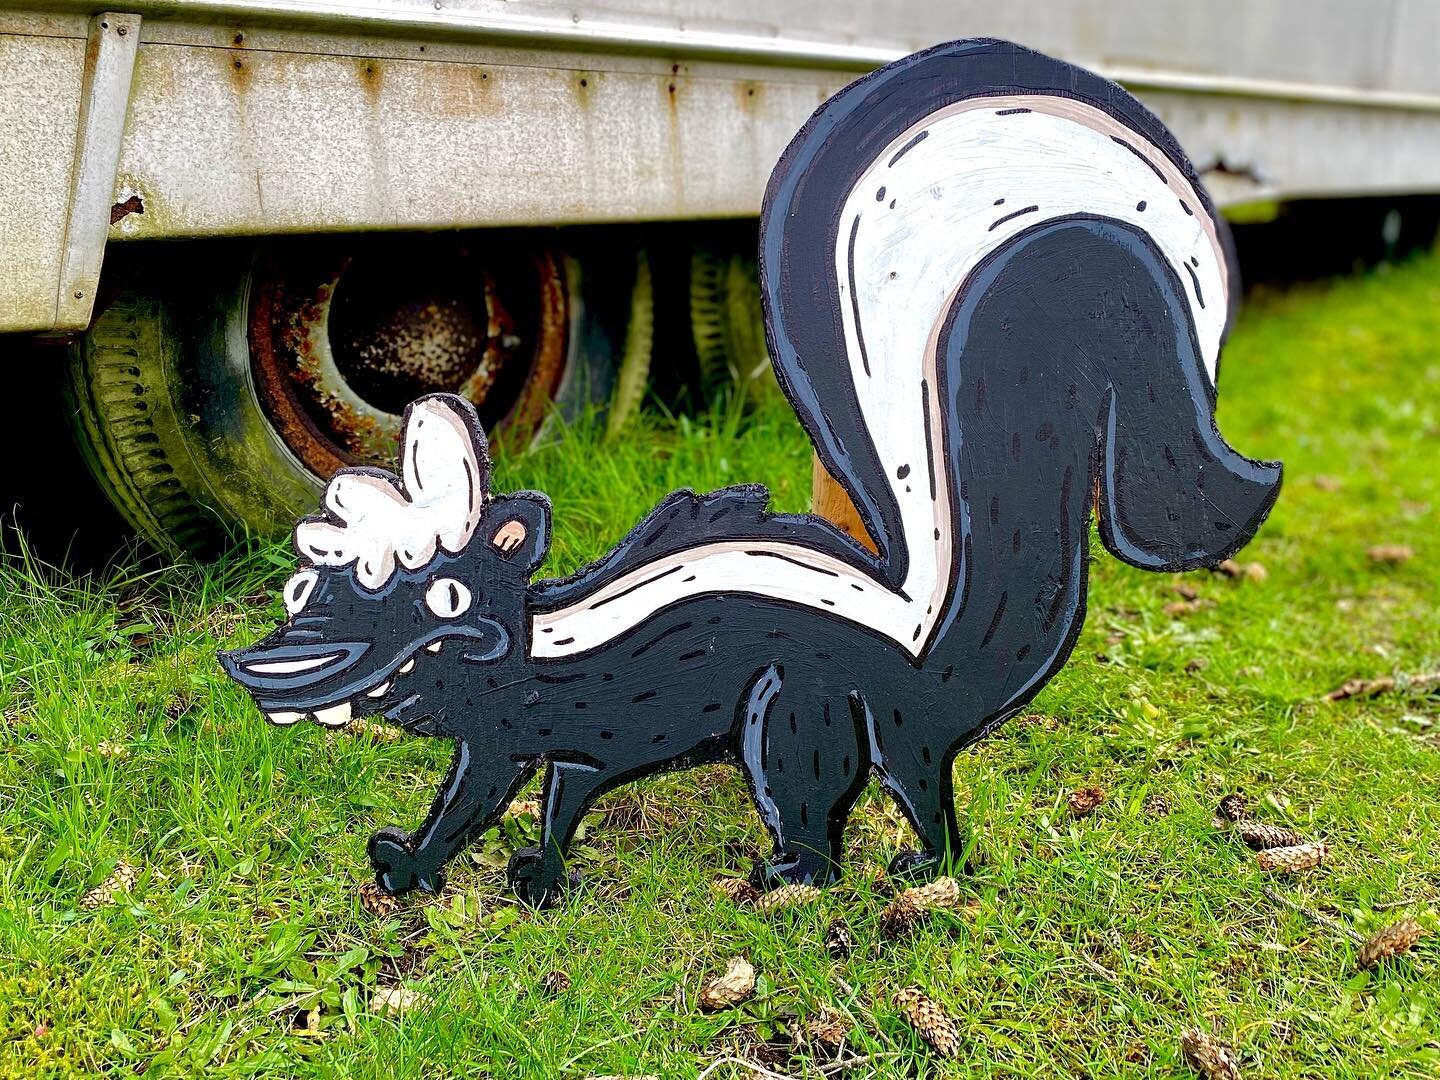 THE CRITTER CREW

8: The Skunk

PYEWWW! Do you all smell that? The critter crew just got way stinkier with it&rsquo;s newest member!

Swipe right to learn more about the skunk!

Any guesses as to who might be next? Check back tomorrow to see if you w